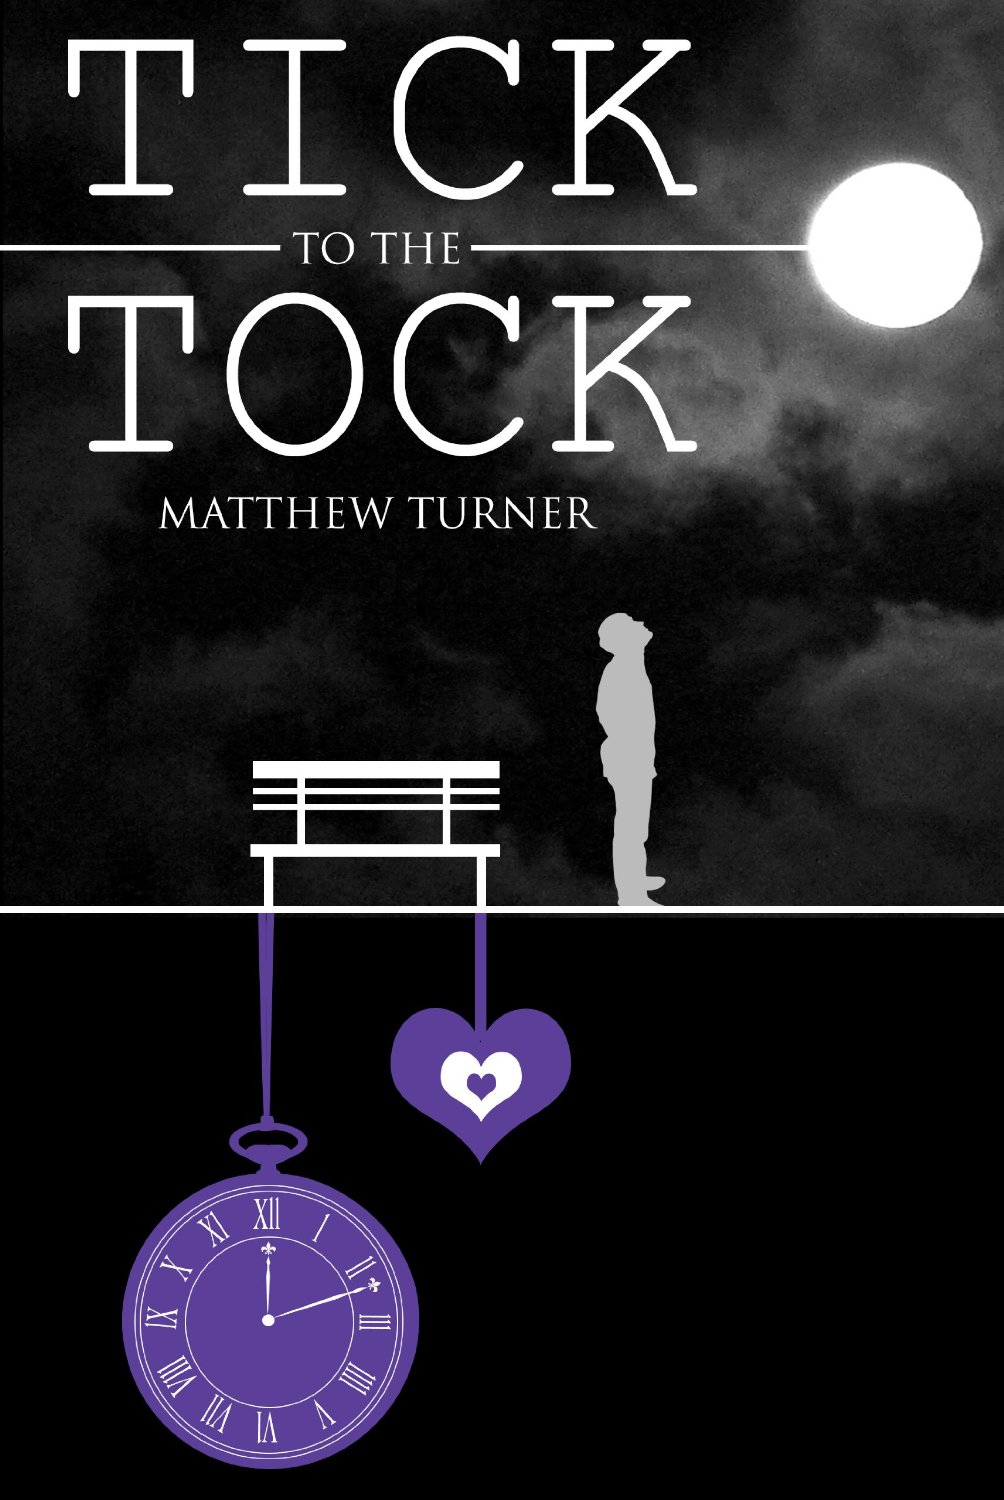 TICK to the TOCK (A Coming-of-Age Story) by Matthew Turner